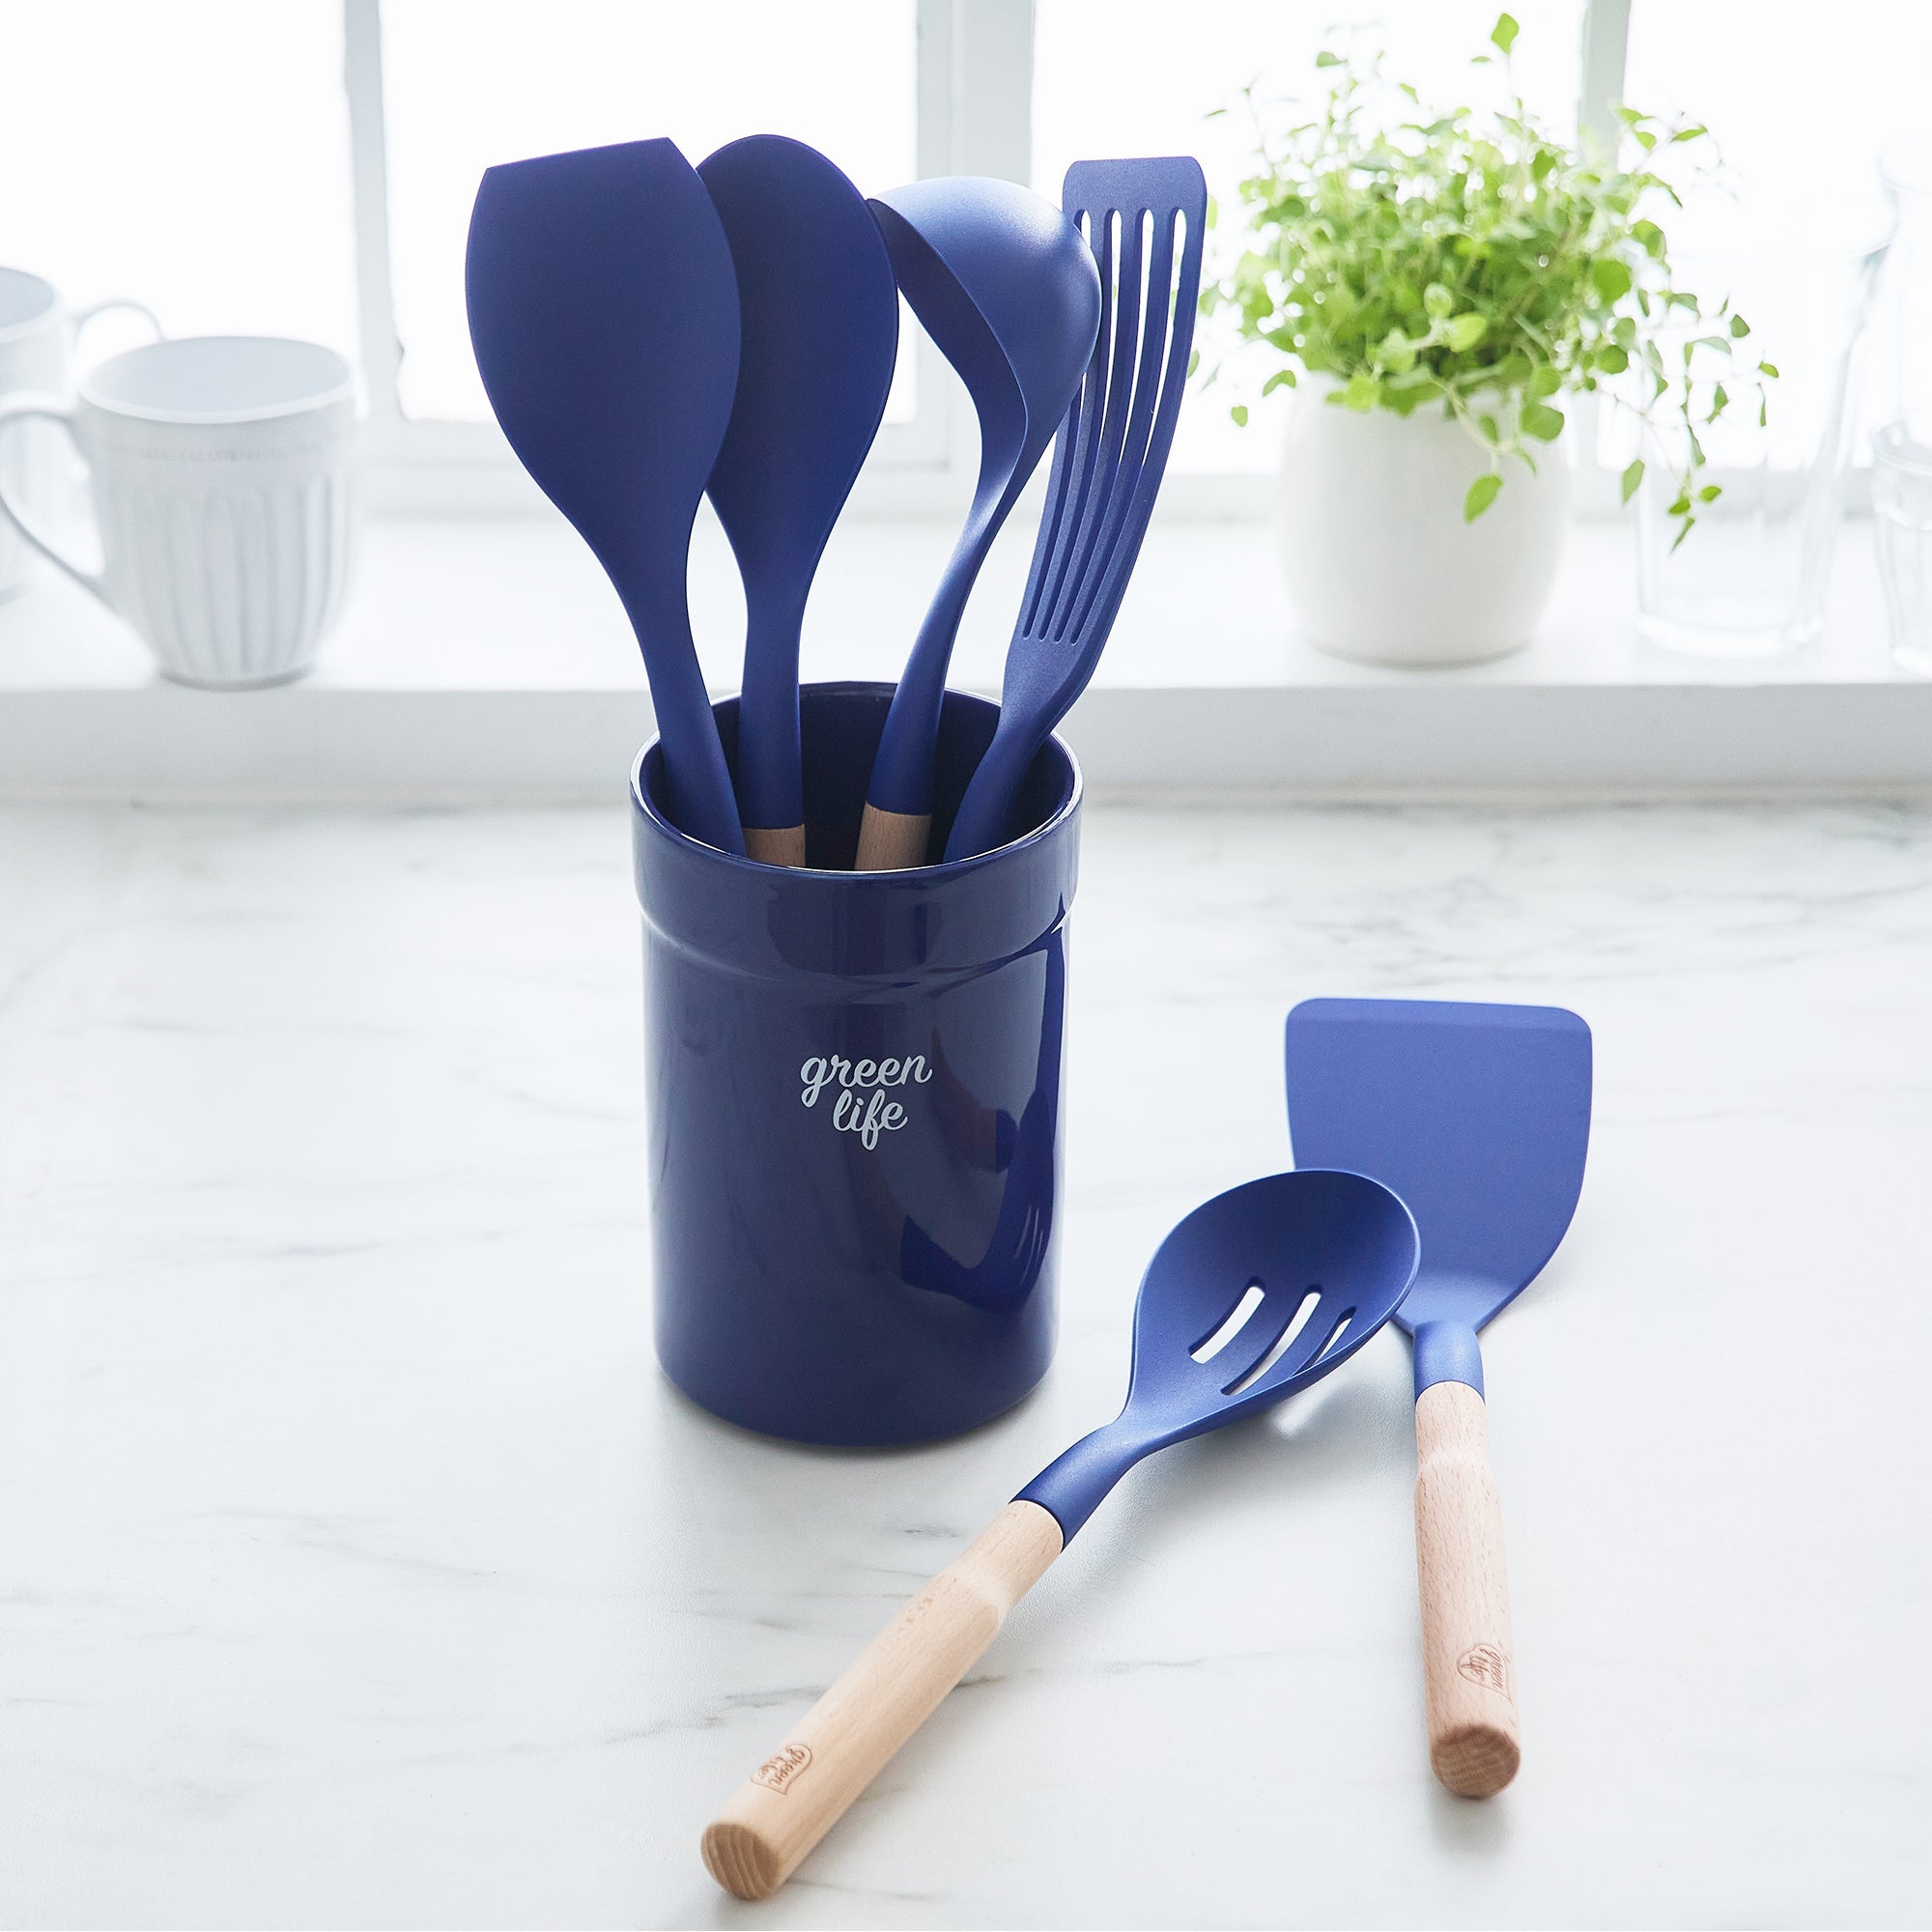 Cooks' Tools: Up to 40% Off